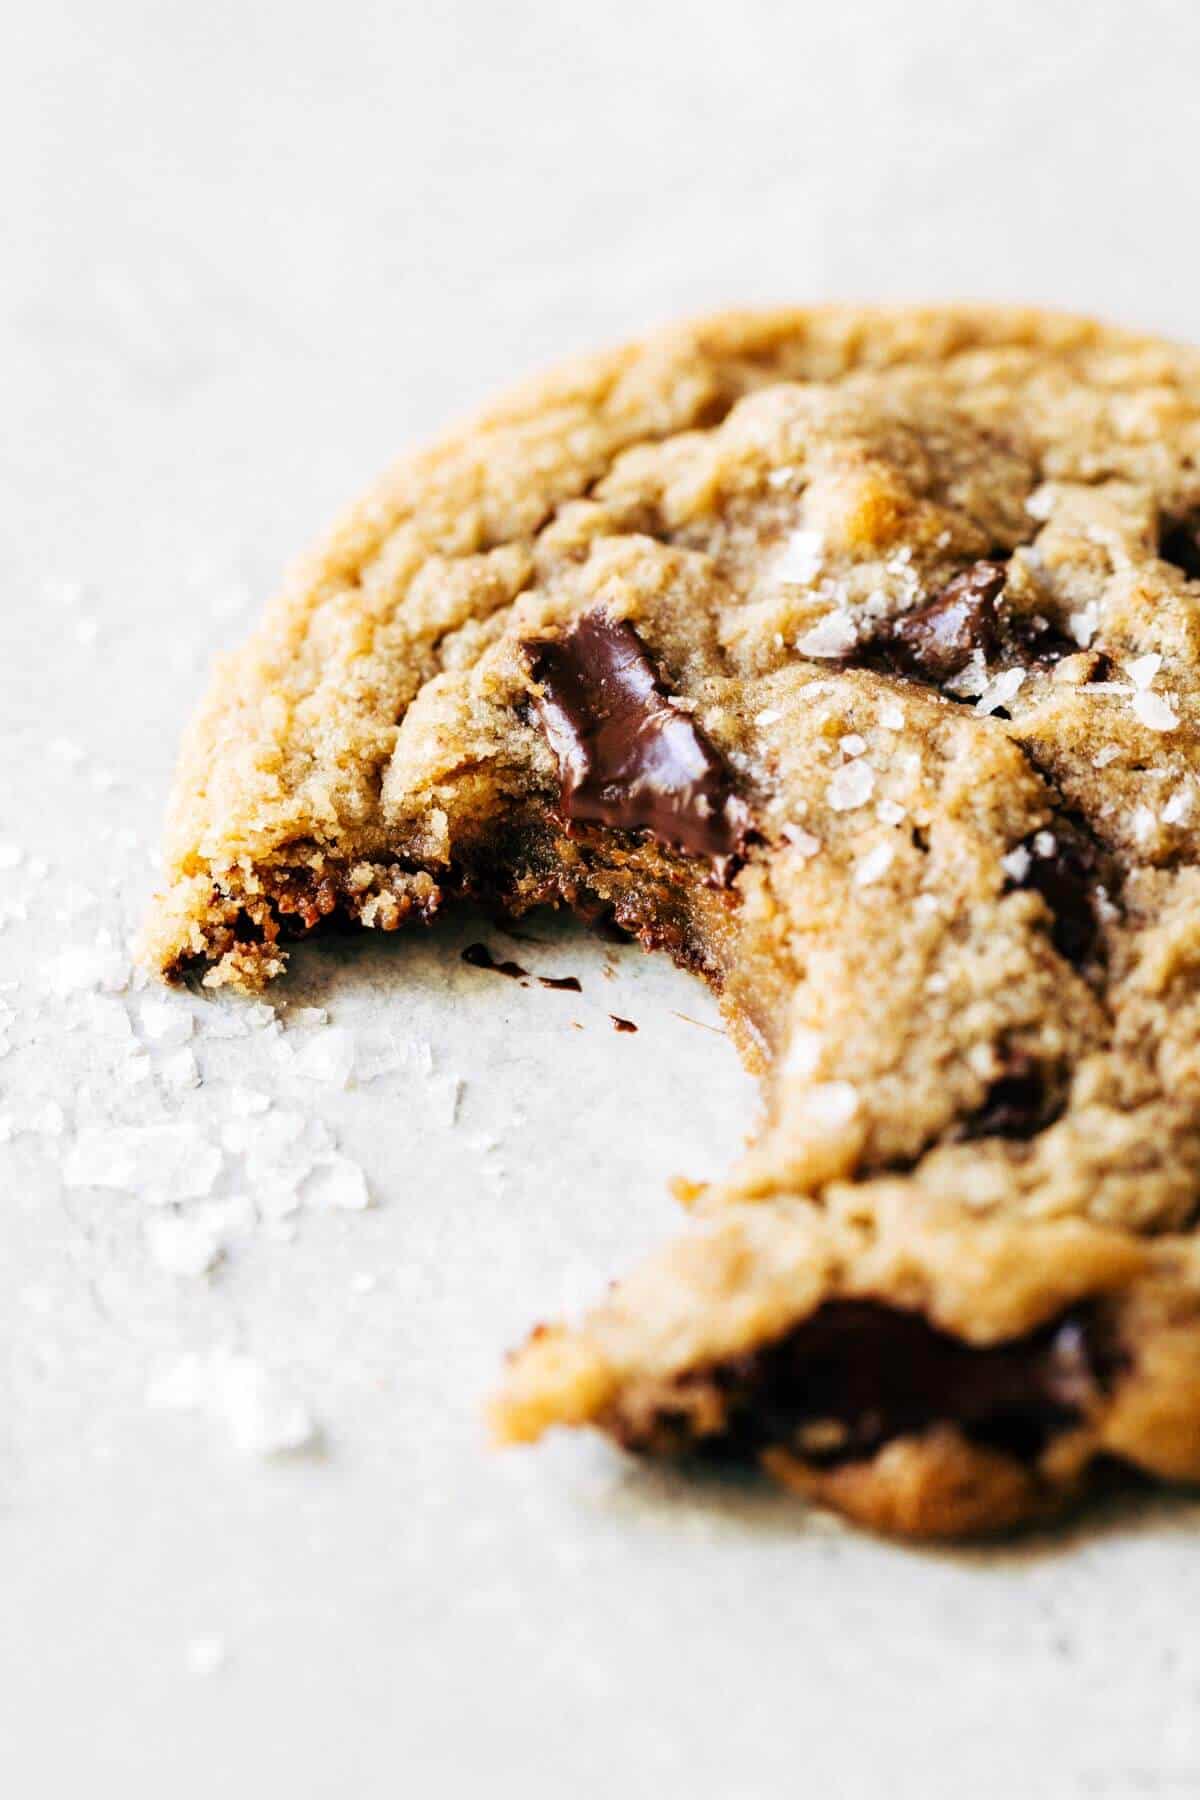 a brown butter chocolate chip cookie with a bite taken out